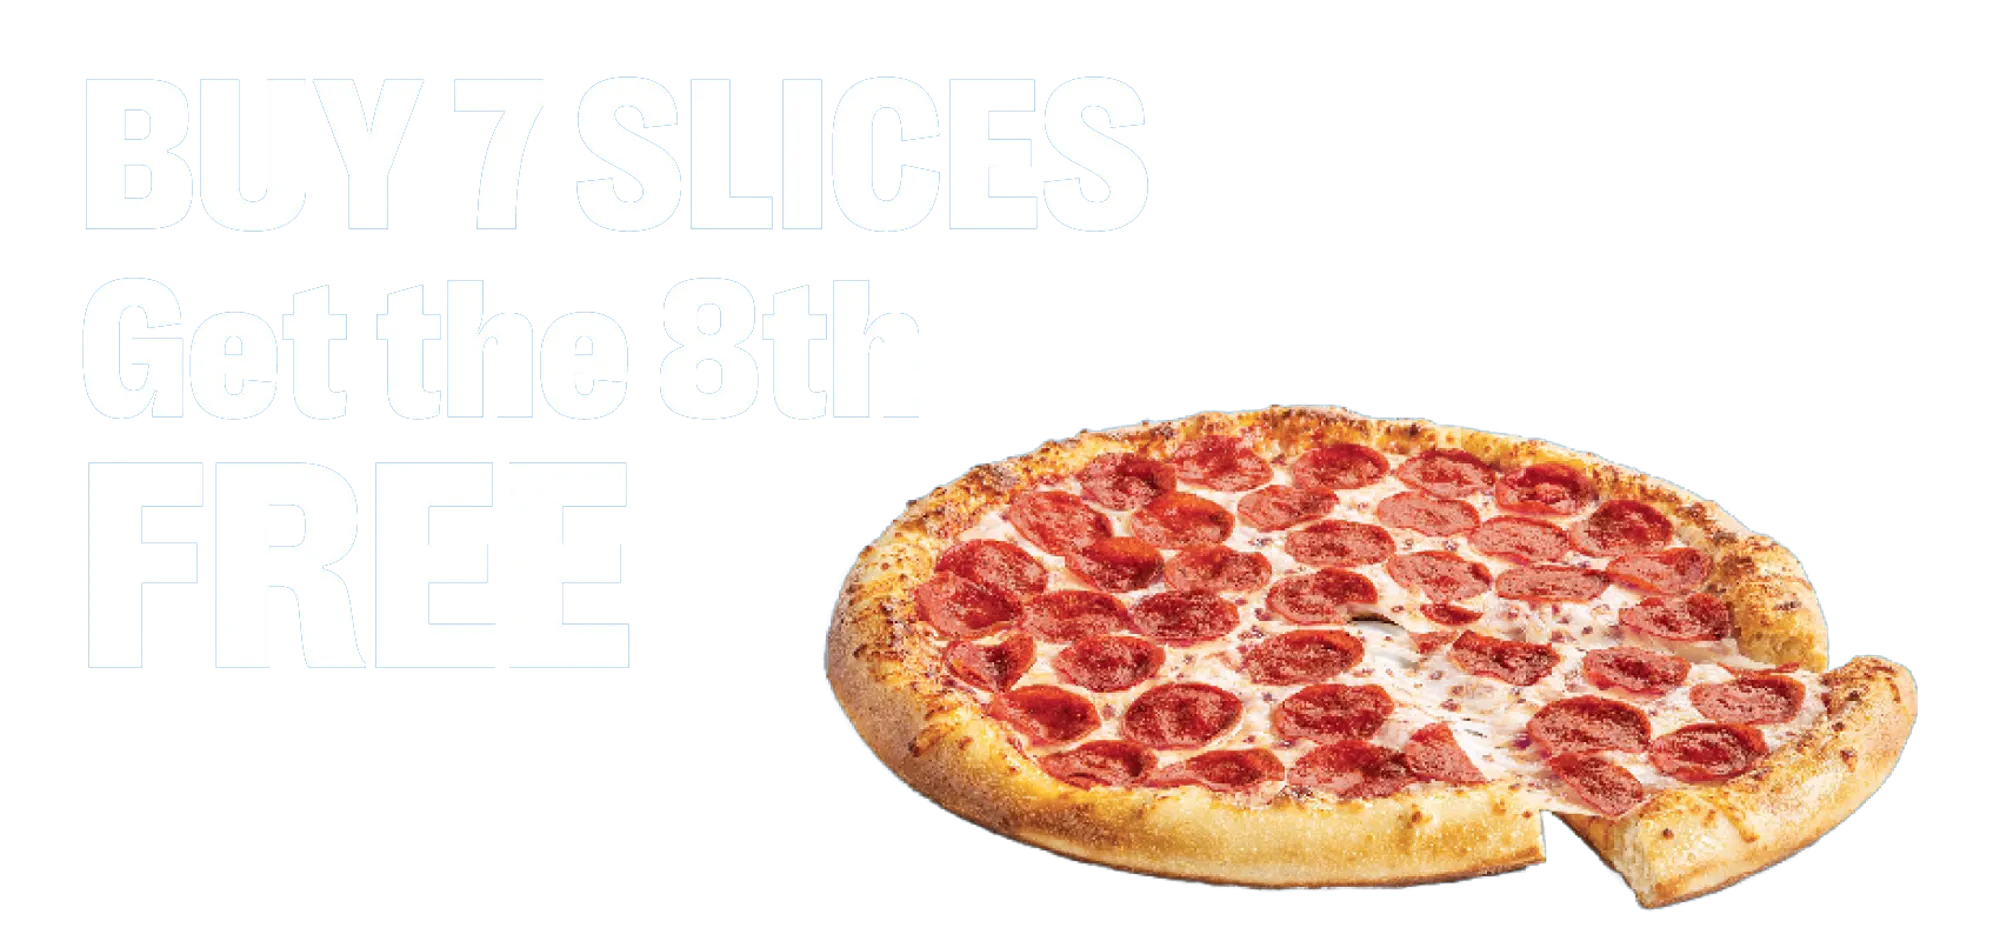 Get your 8th slice free